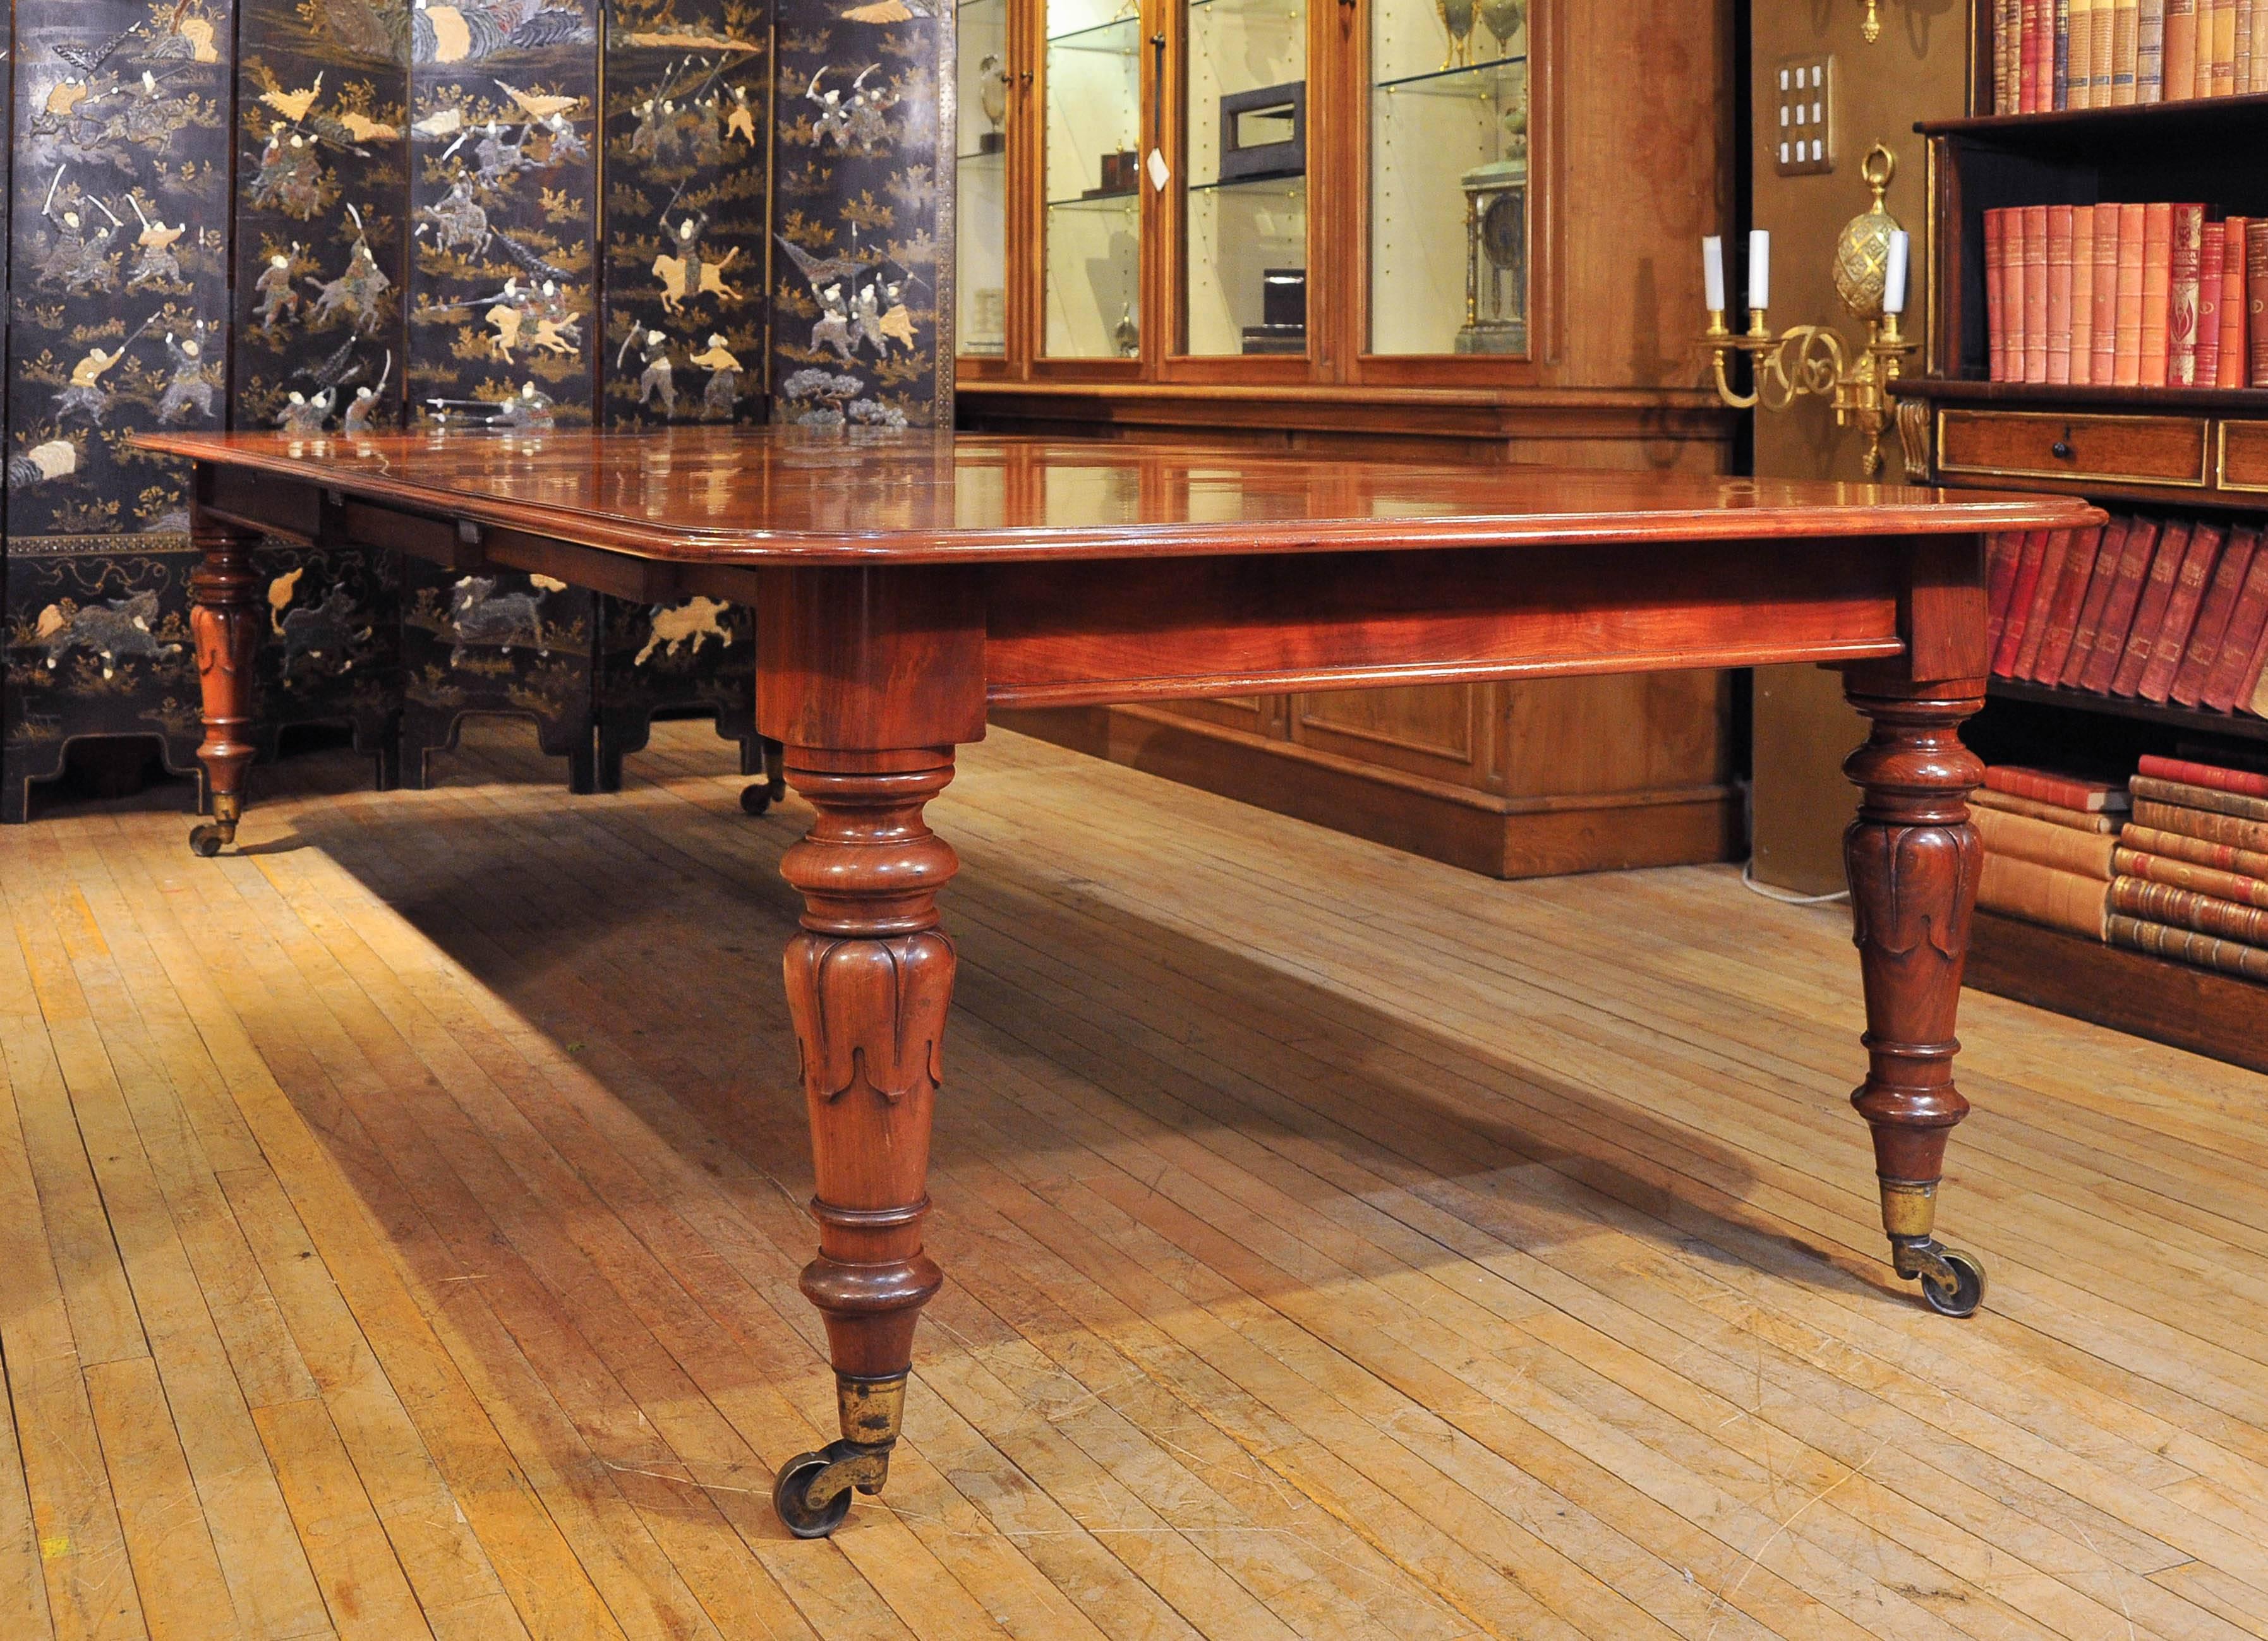 This ample and very imposing mahogany dining table features lovely tulip shaped leg supports ending on oversized brass castors. The table has three leaves and is stamped Johnstone and Jeanes, very well-known and highly regarded cabinet makers of the